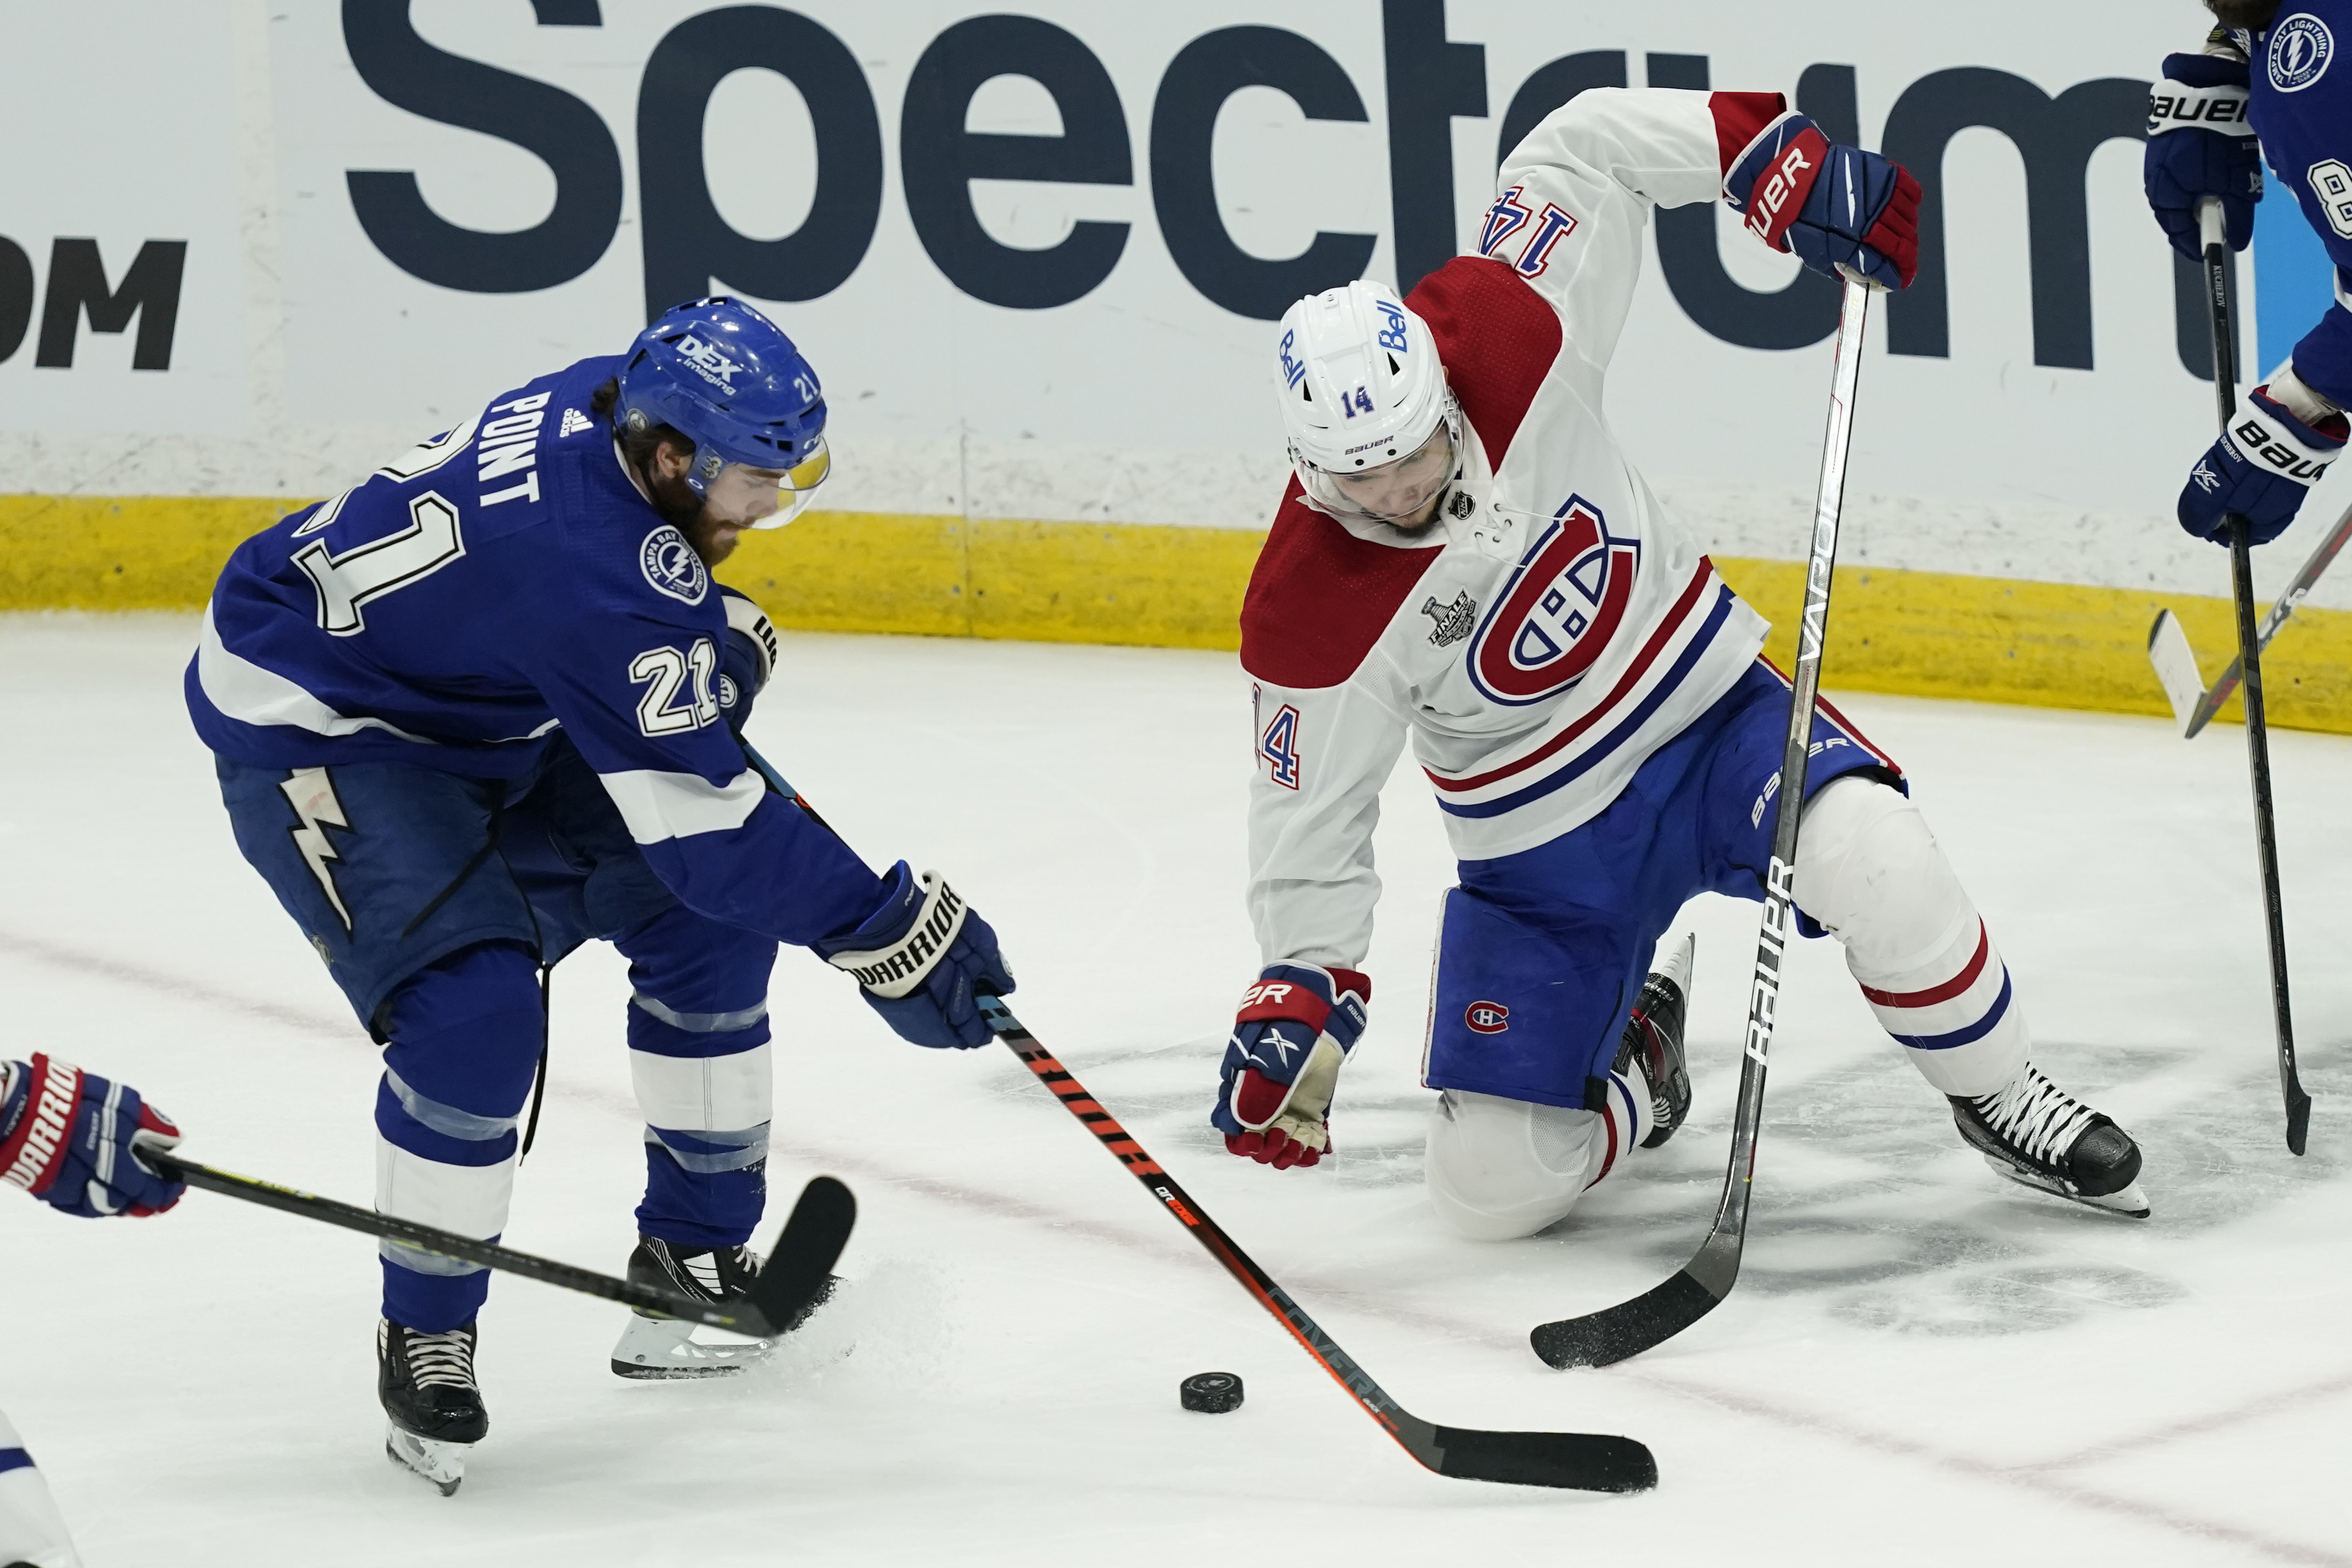 Tampa Bay Lightning vs. Montreal Canadiens Game 1 free live stream